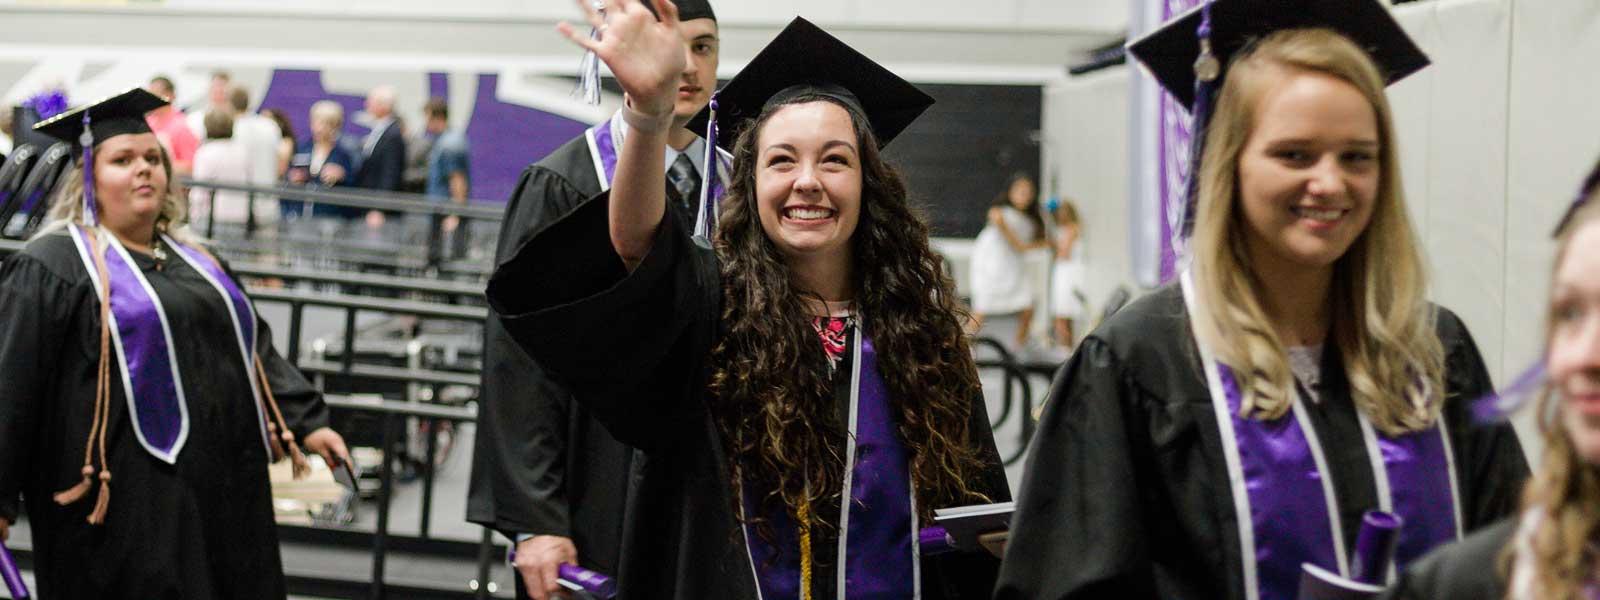 smiling student in commencement processional